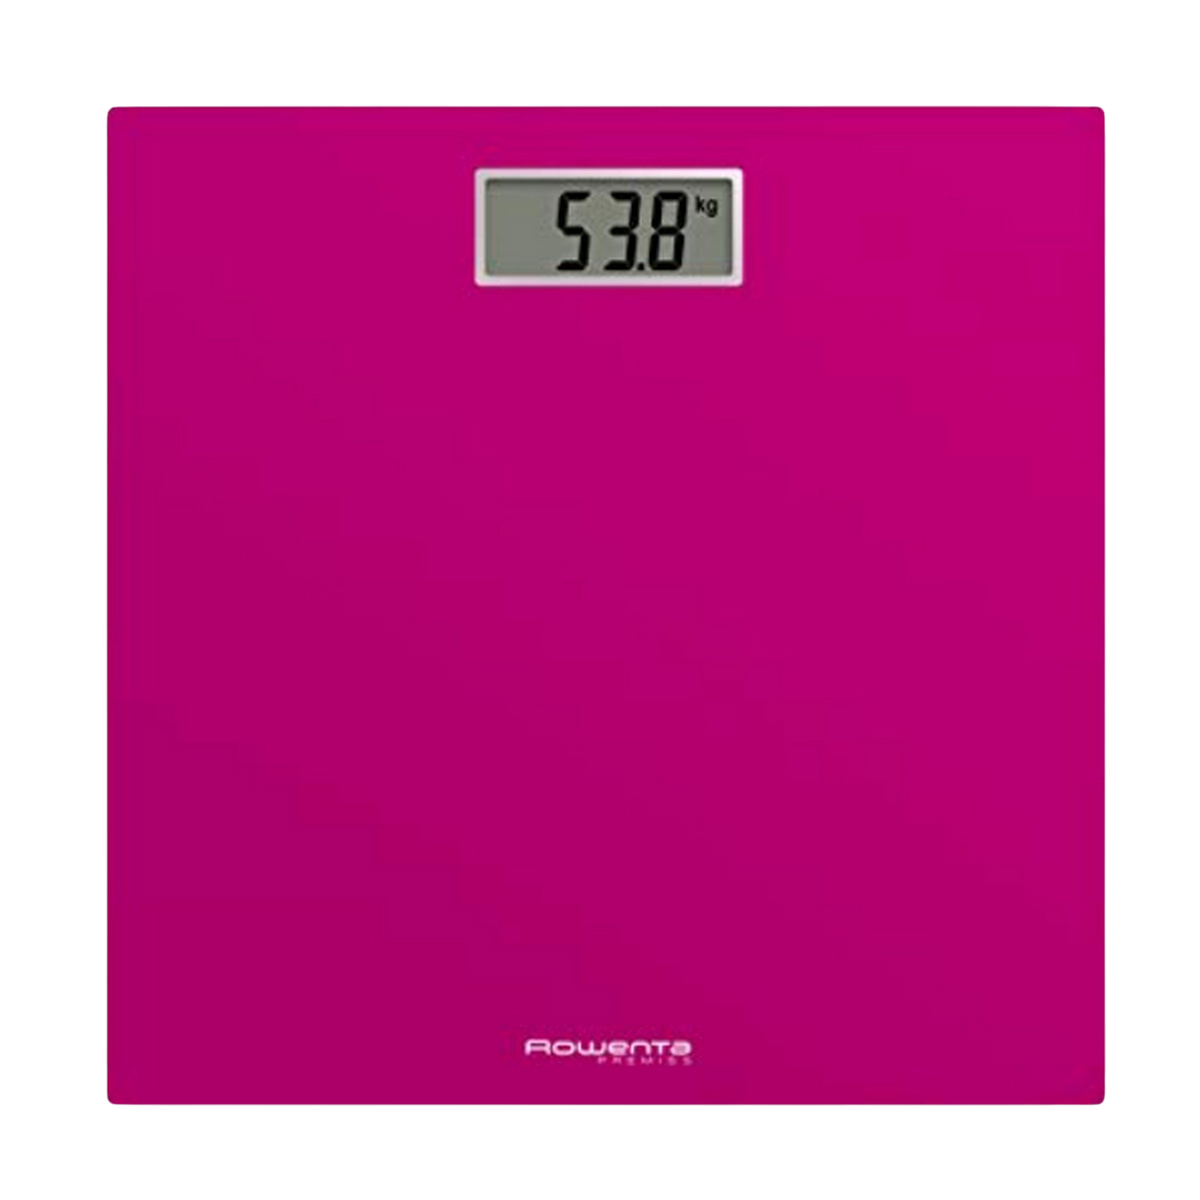 BS1403 ROWENTA scale Personal